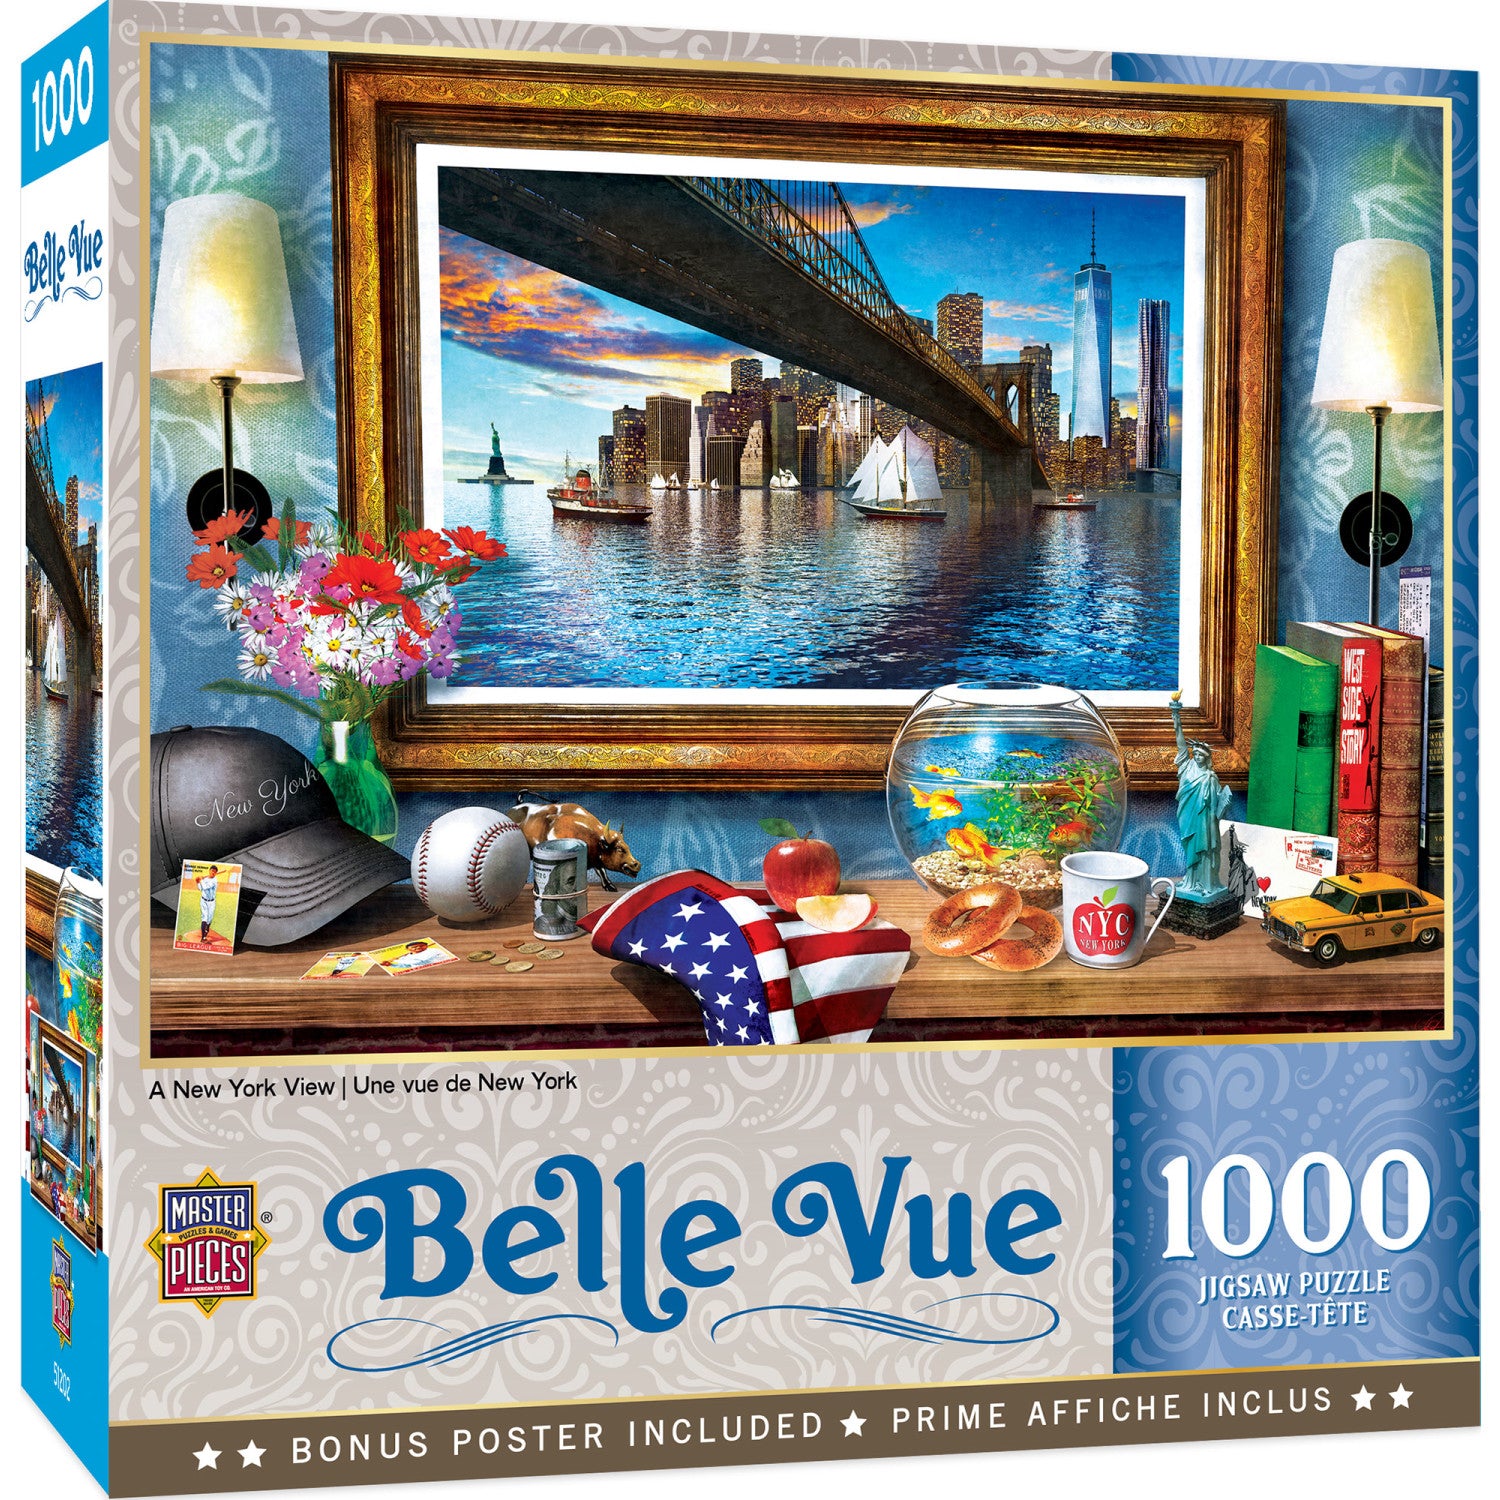 Belle Vue - A New York View 1000 Piece Jigsaw Puzzle